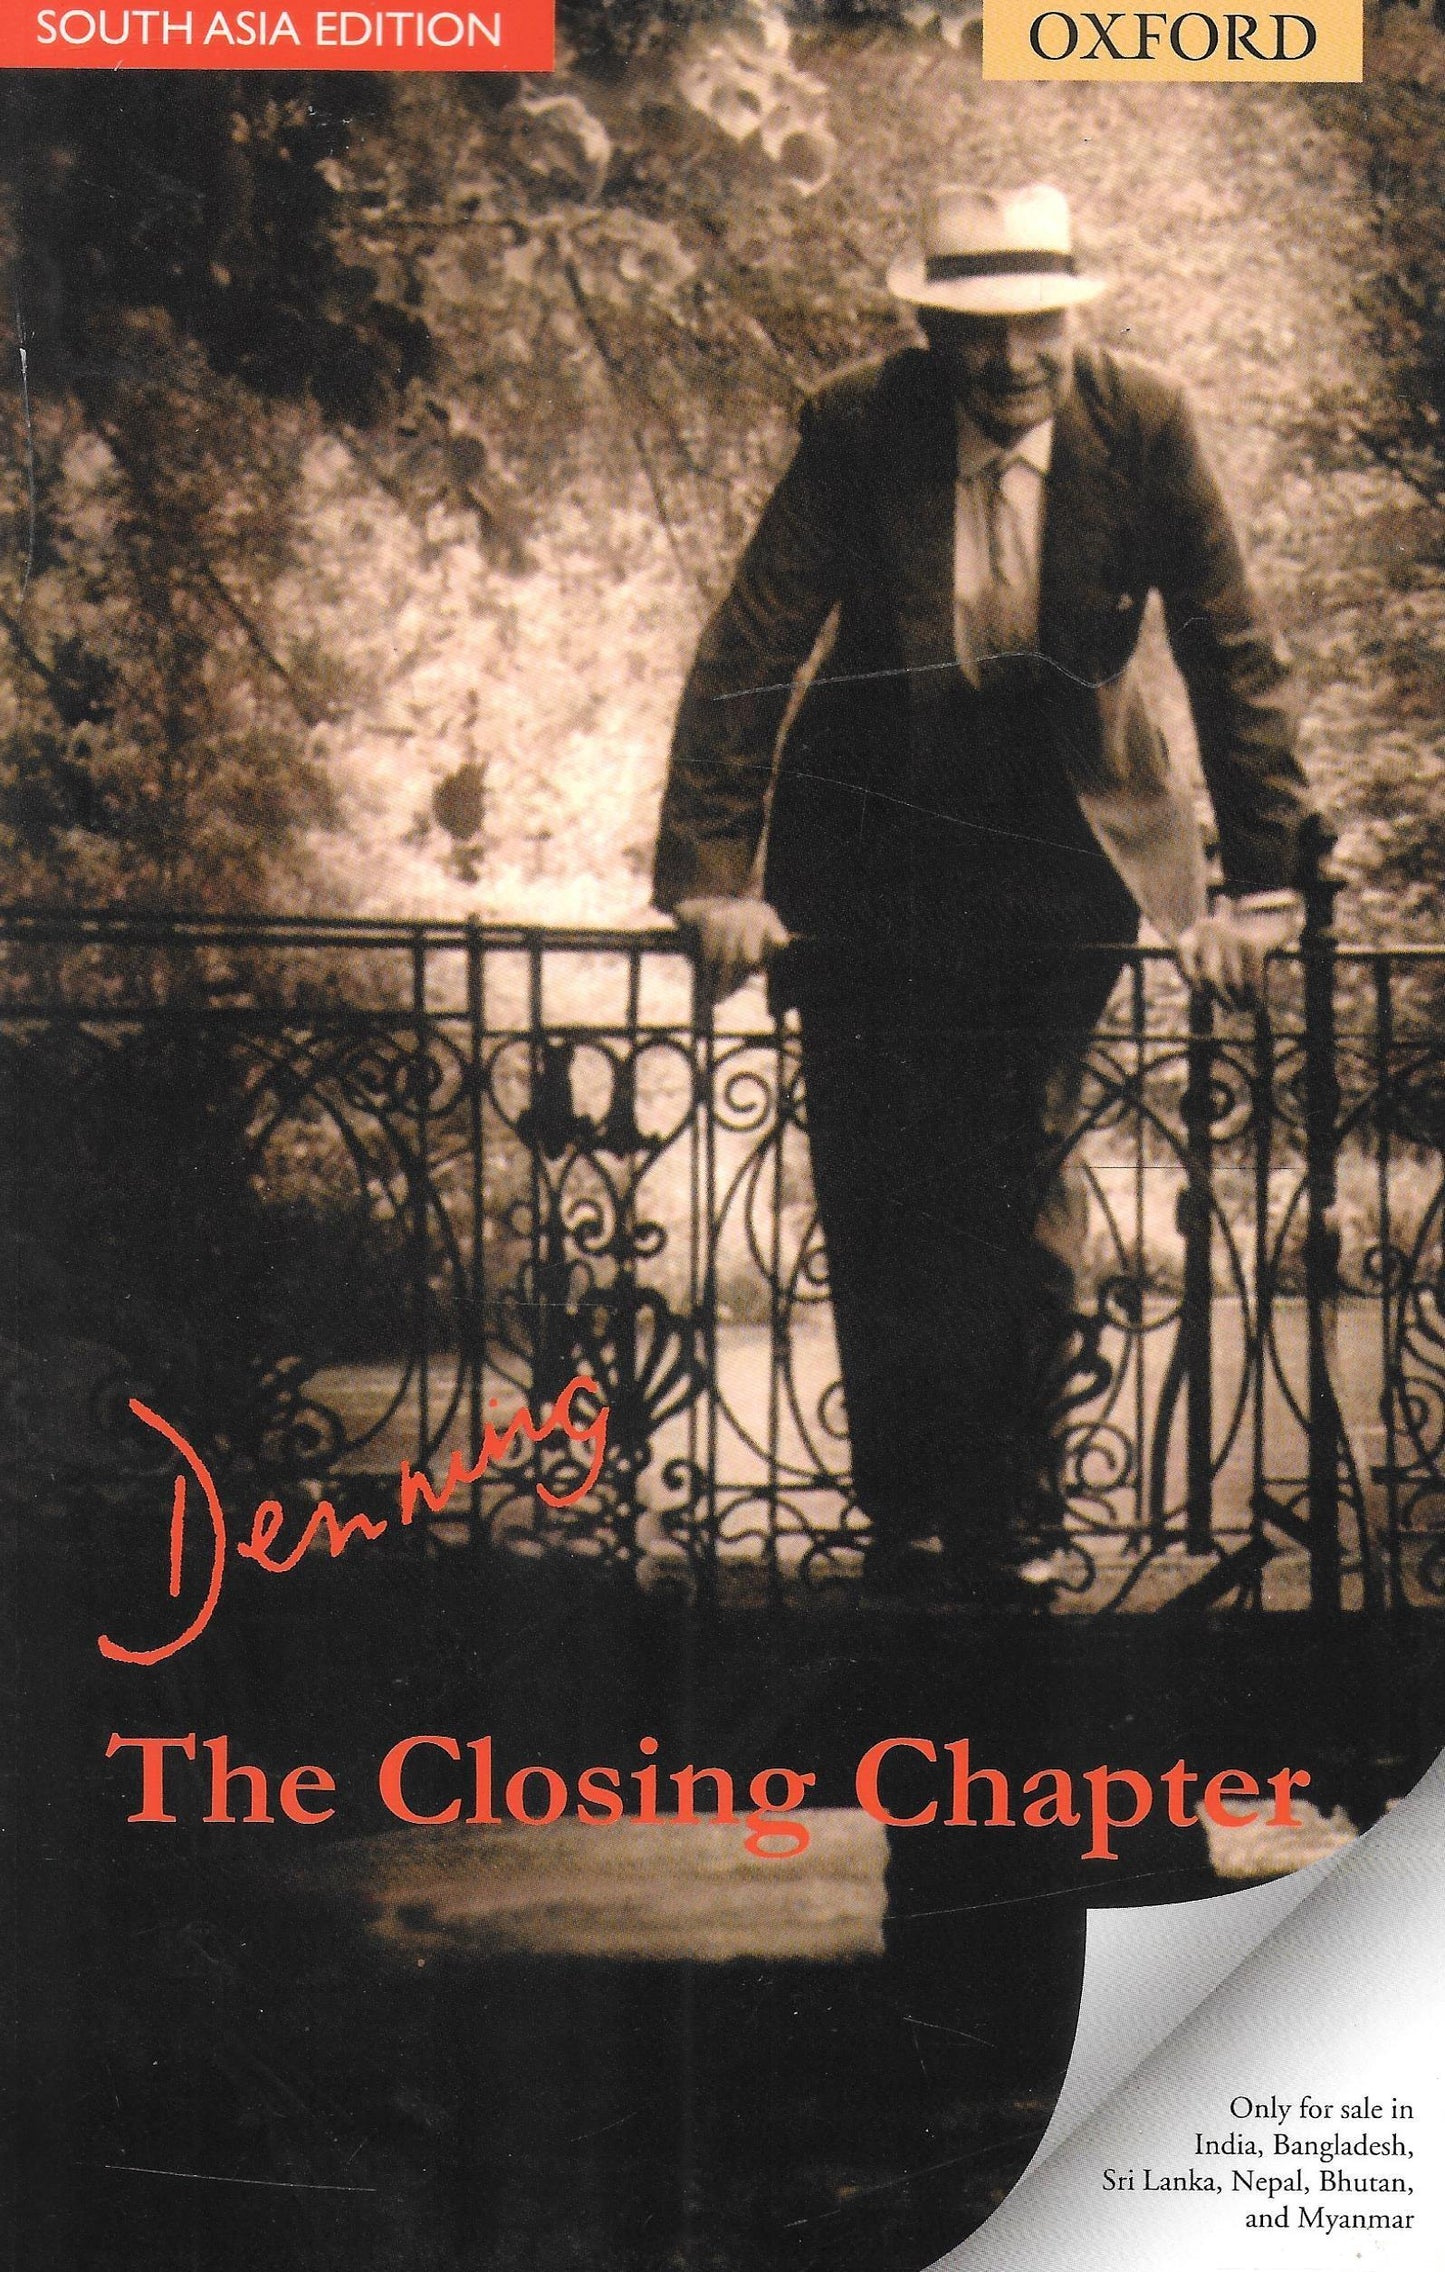 The Closing Chapter